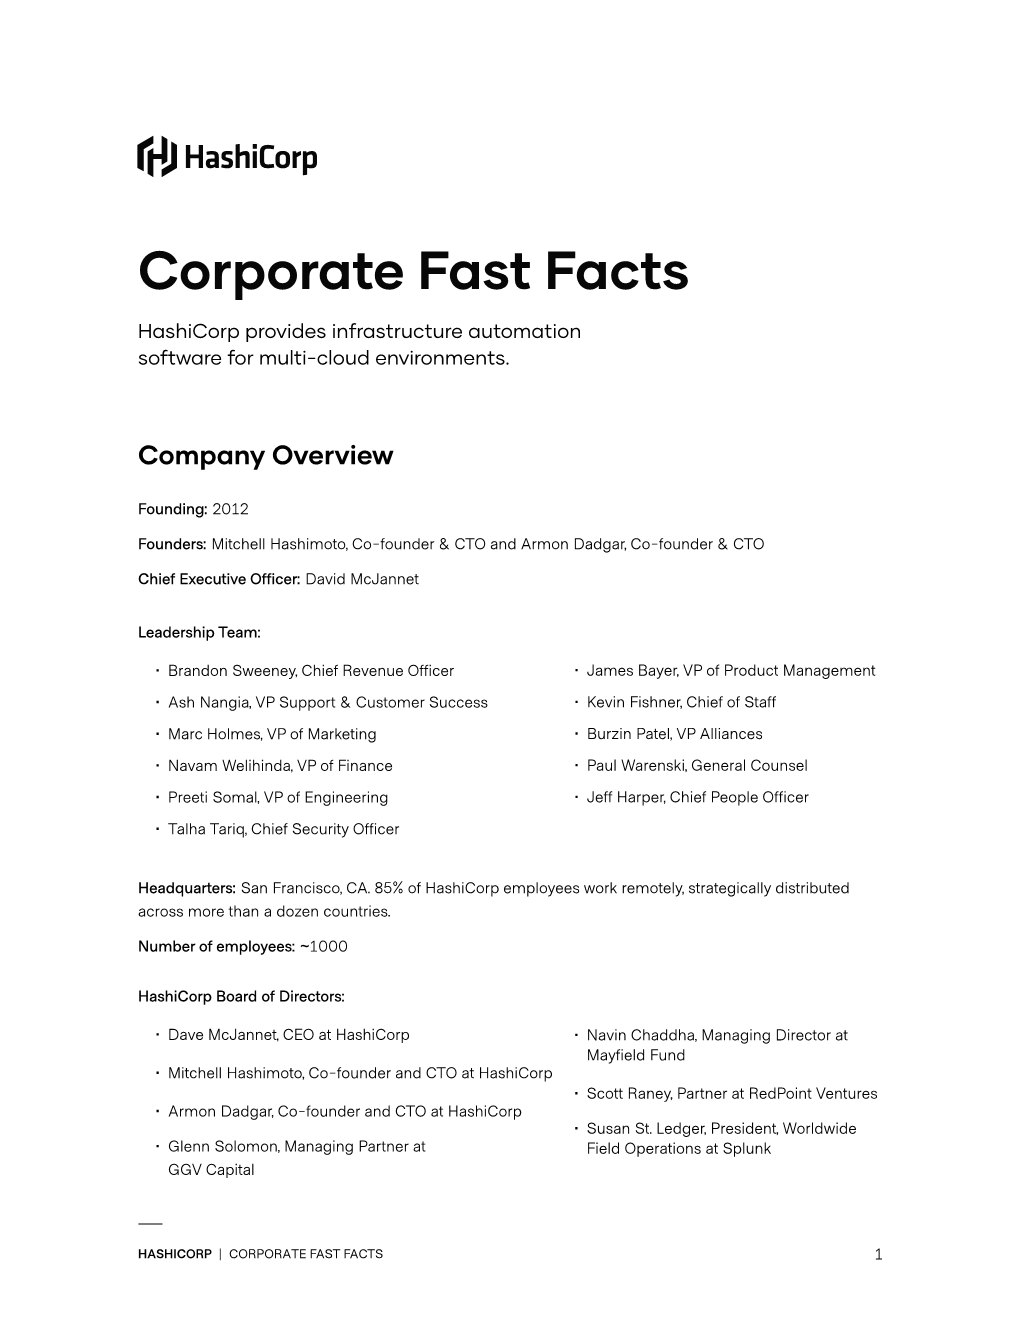 Corporate Fast Facts Hashicorp Provides Infrastructure Automation Software for Multi-Cloud Environments